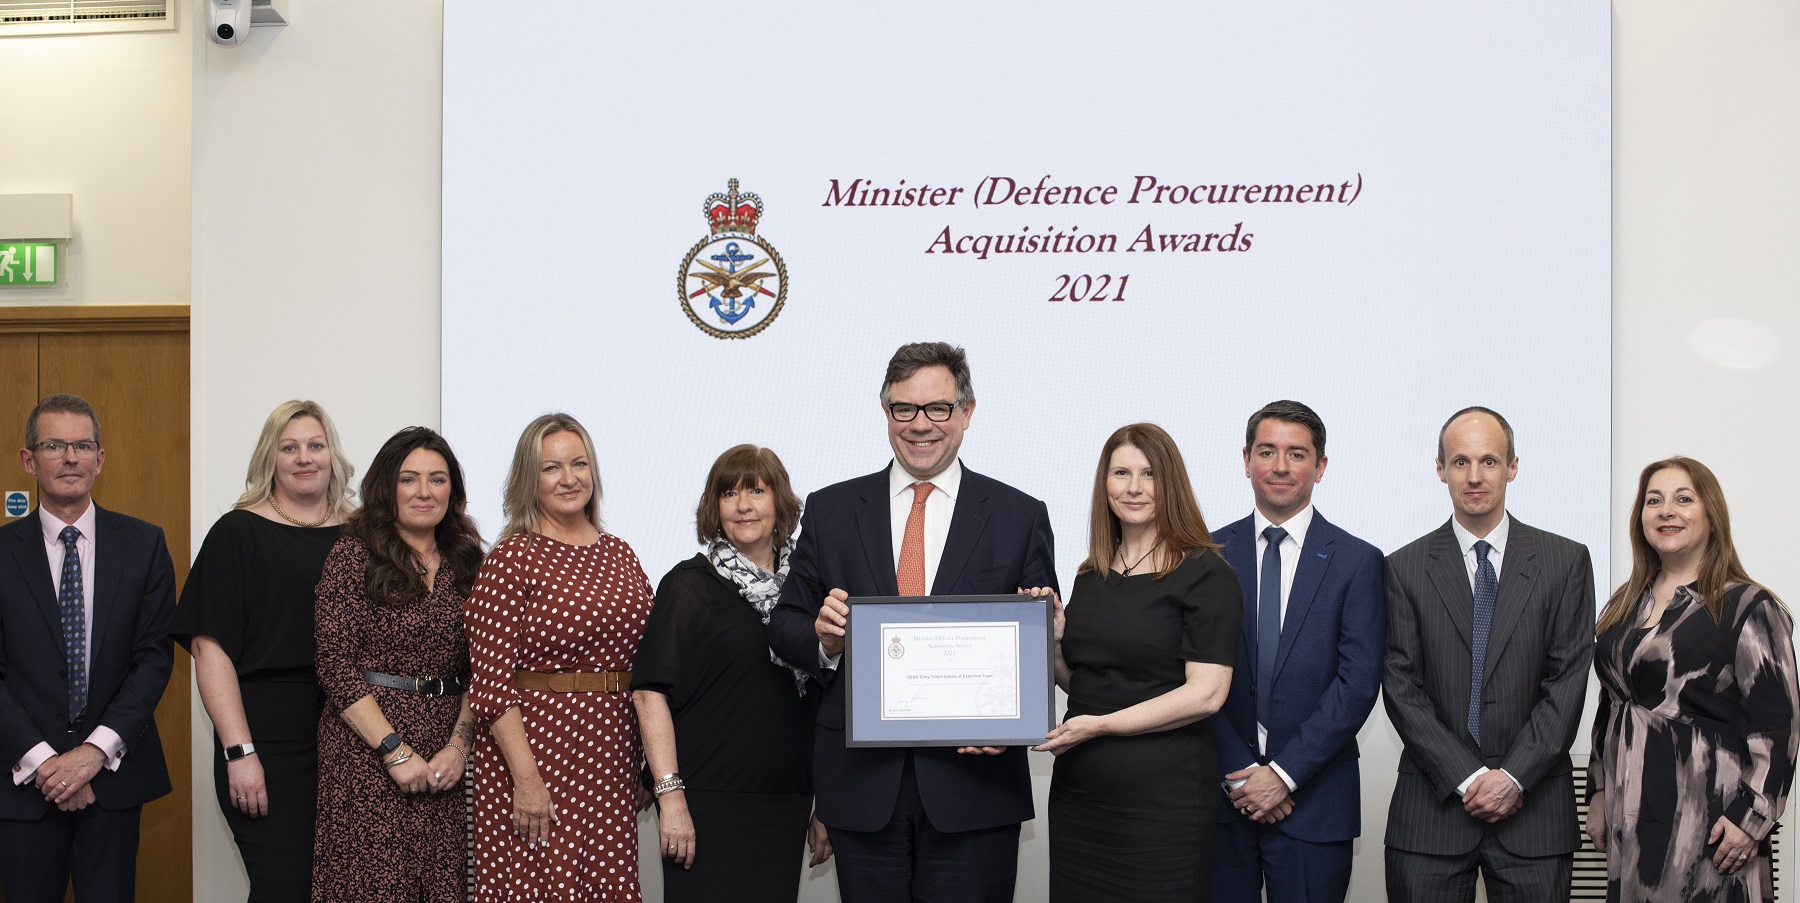 The ETCoE team accept their award from Min DP Jeremy Quin